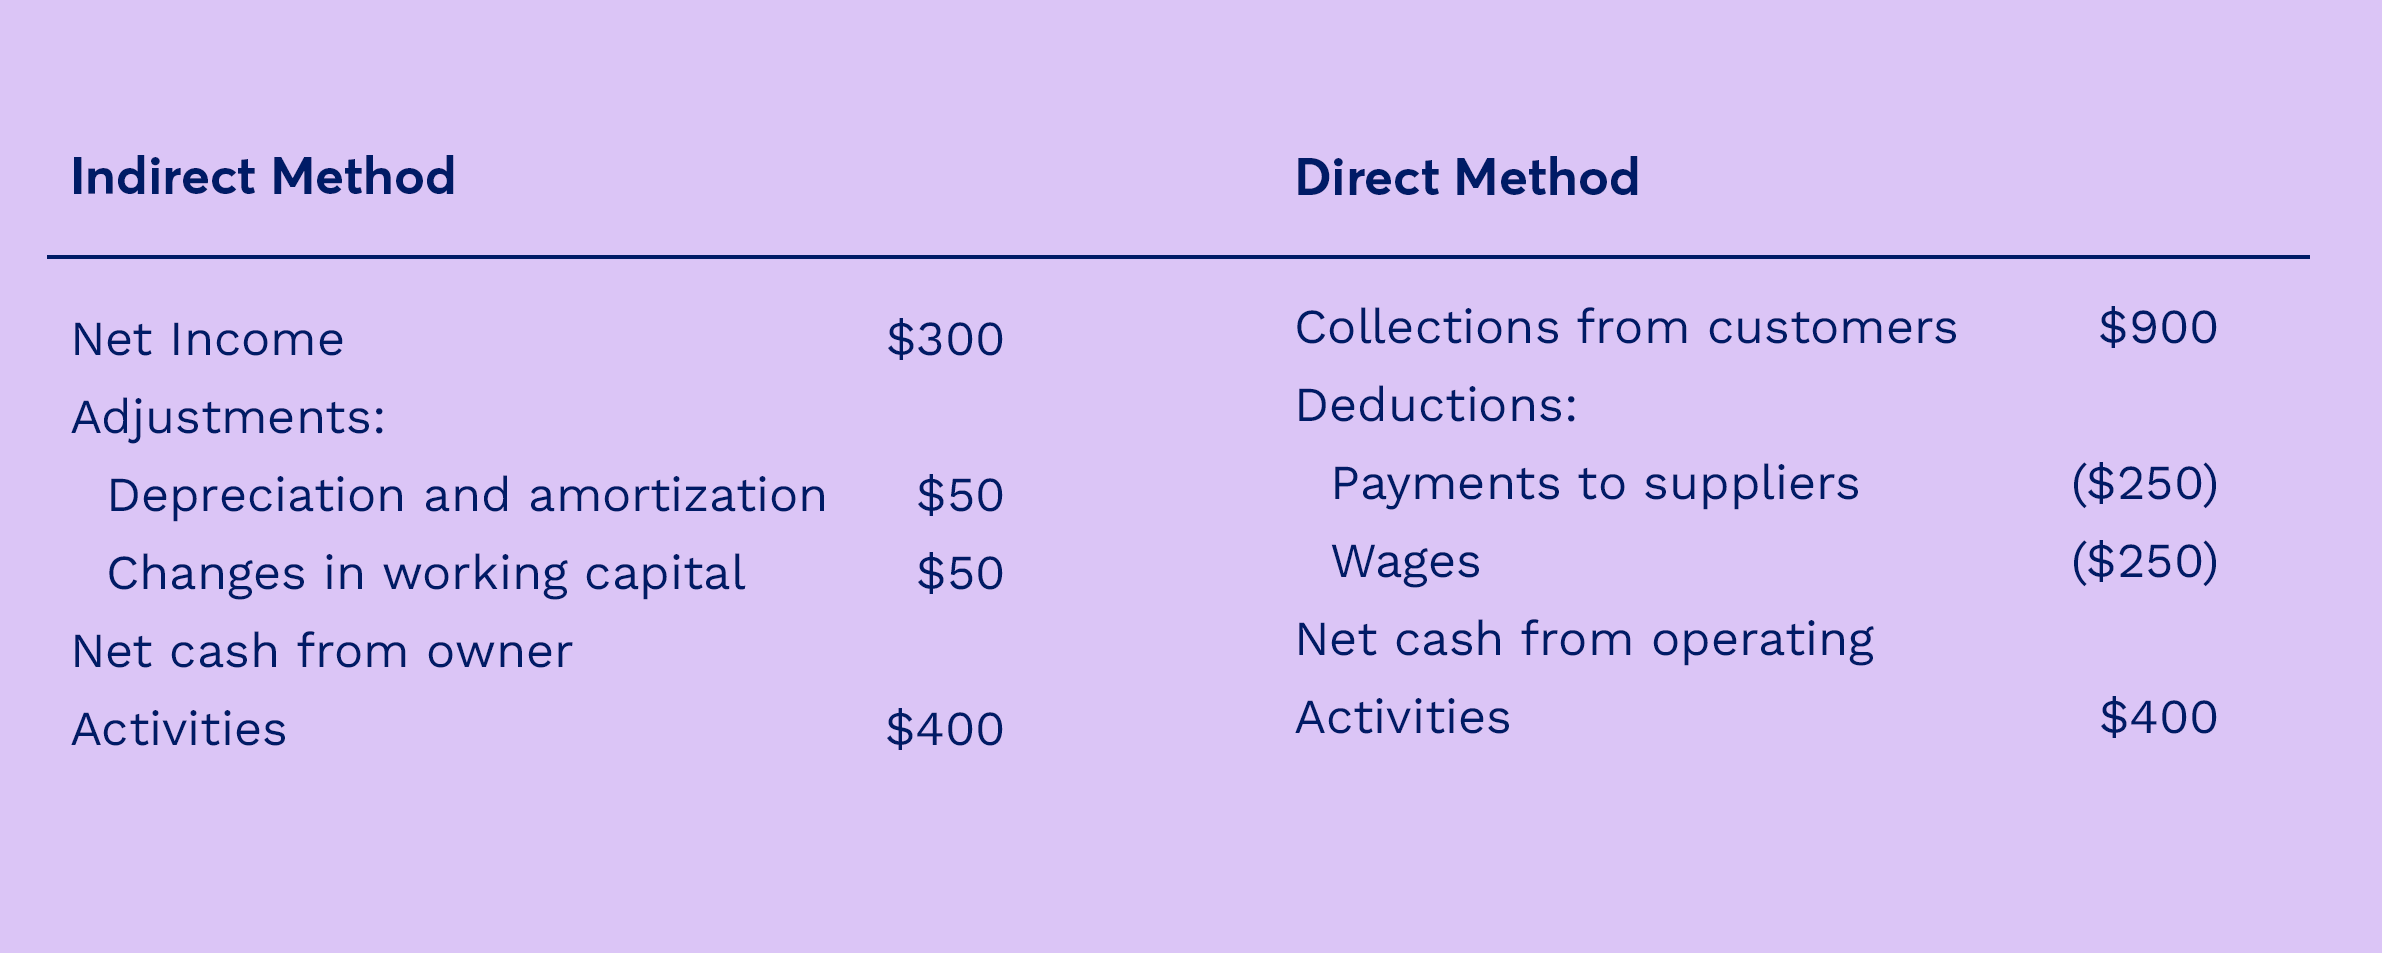 A chart showing indirect method and direct method. Under the indirect method, there is Net Income; Adjustments (Depreciation and amortization, Changes in working capital); Net cash from owner; and Activities. Under direct method, there is collections from customers; deductions (payments to suppliers, wages); net cash from operating; and activities.